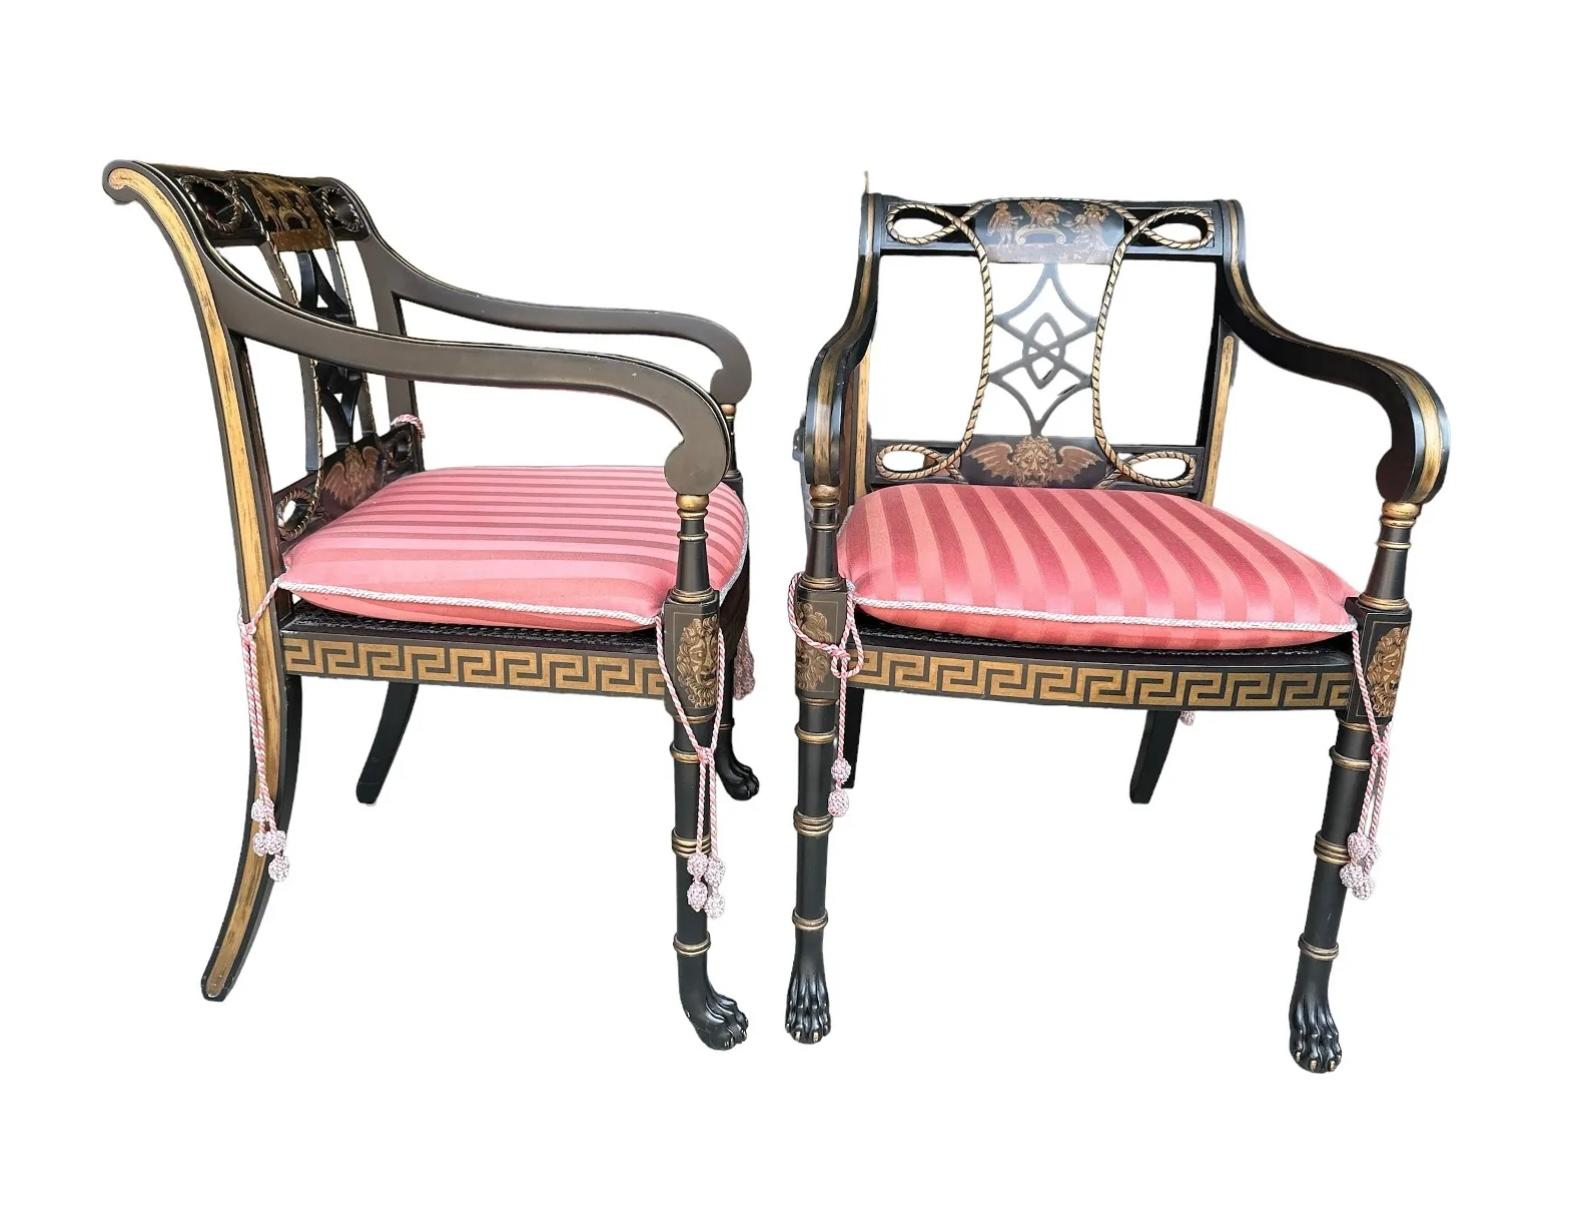 Pair of regency style painted and gold leafed arm chairs. Black painted chairs feature gold colored Lion's heads on inside chair back and legs, with gold Greek key design along bottom apron. Hairy paw feet front feet complete the uniqueness of these